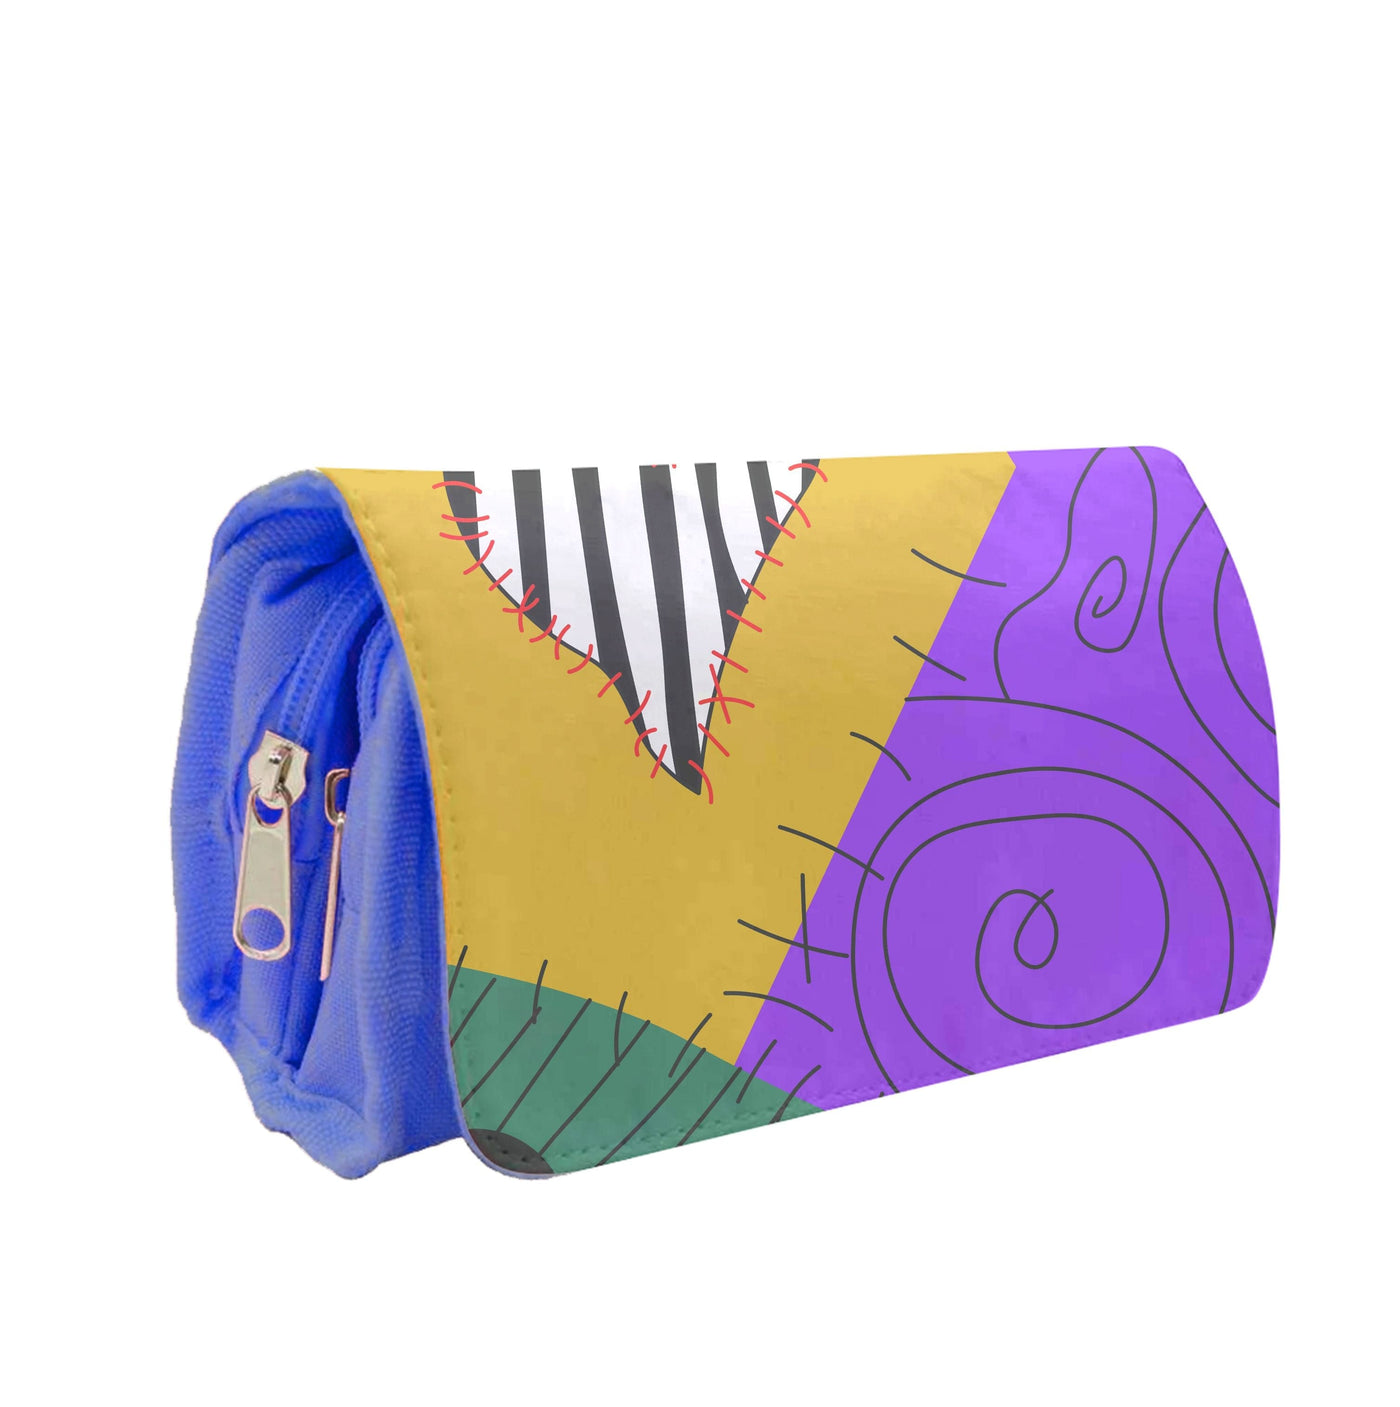 Sally's Dress - The Nightmare Before Christmas Pencil Case